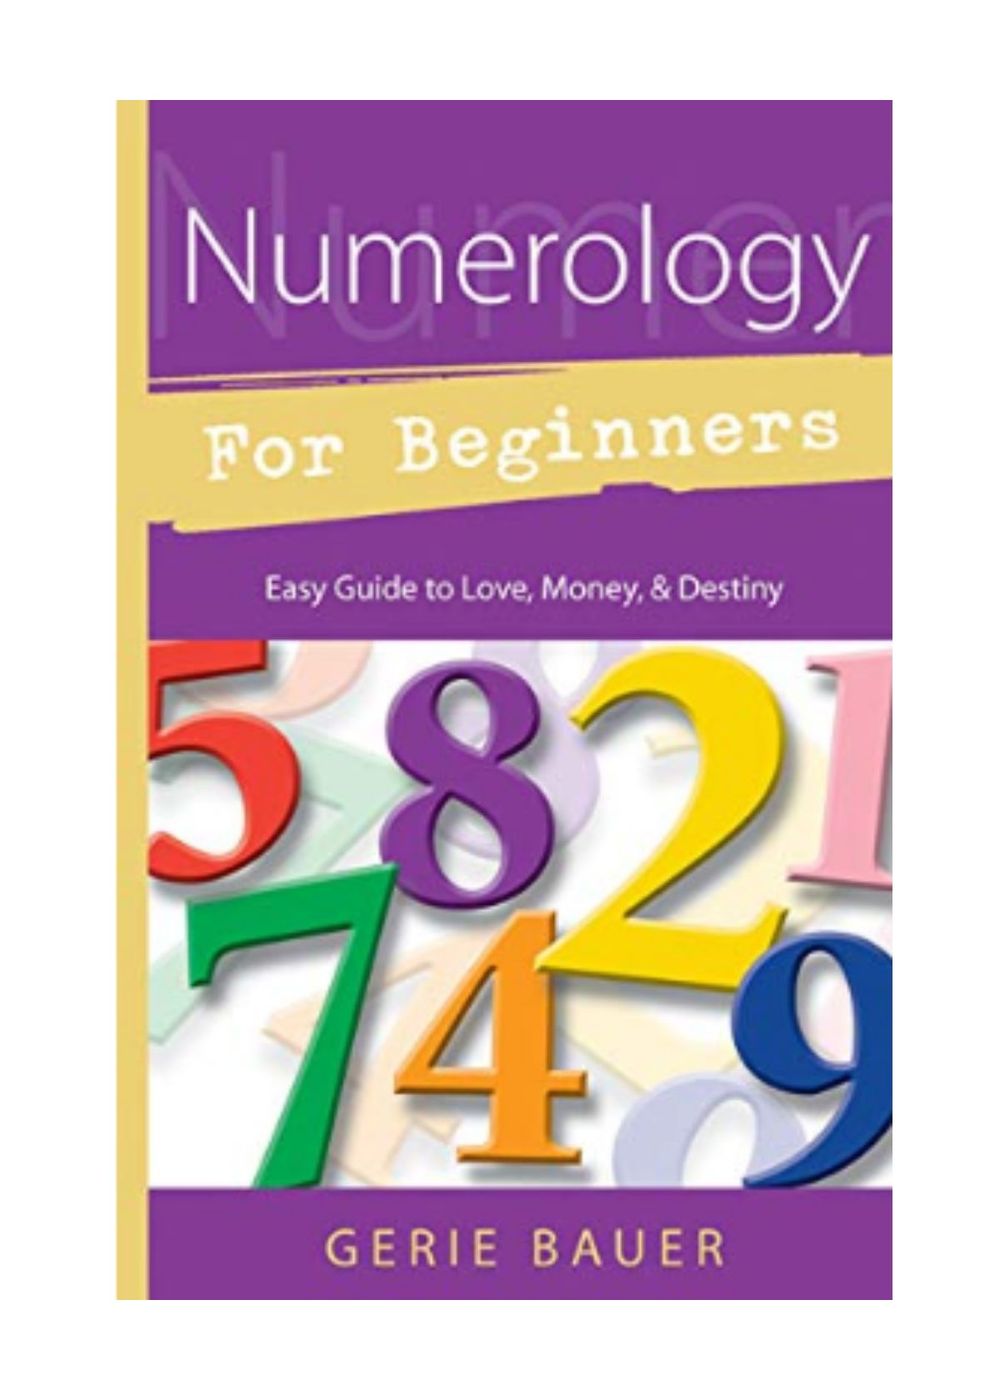 Numerology-for-Beginners-by-Gerie-Bauer